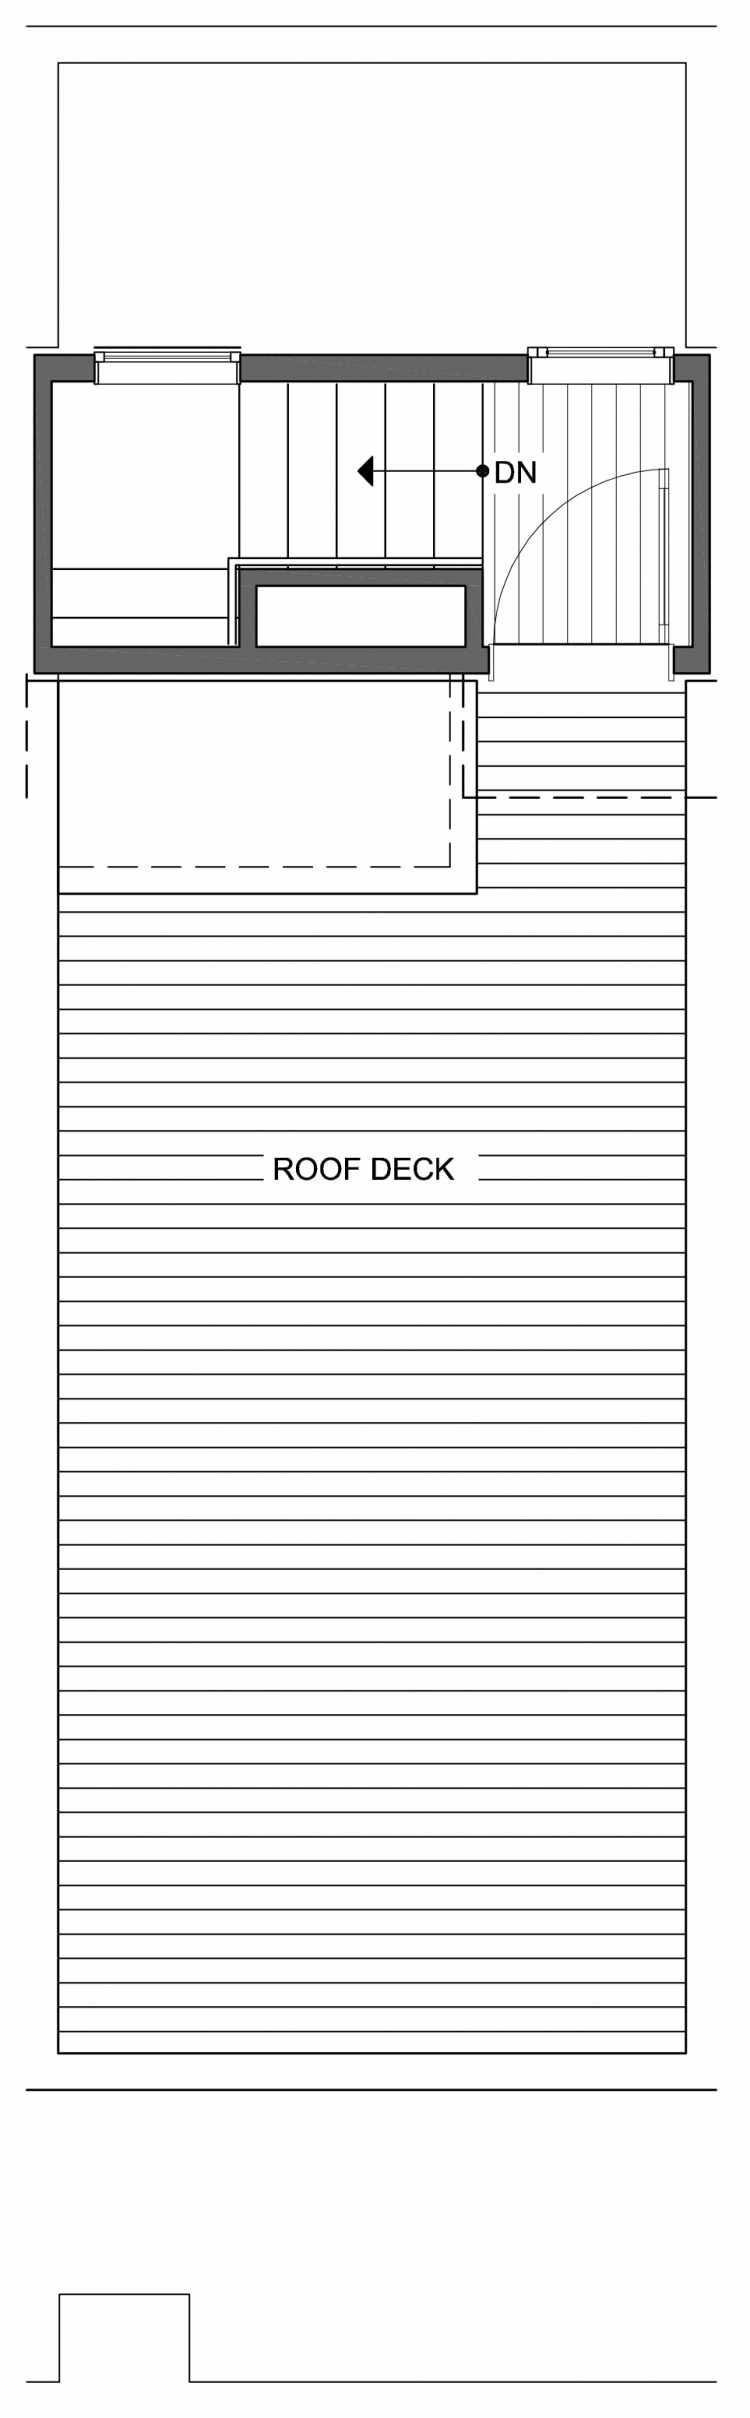 Roof Deck Floor Plan of 806C N 46th St, One of the Nino 15 East Townhomes by Isola Homes